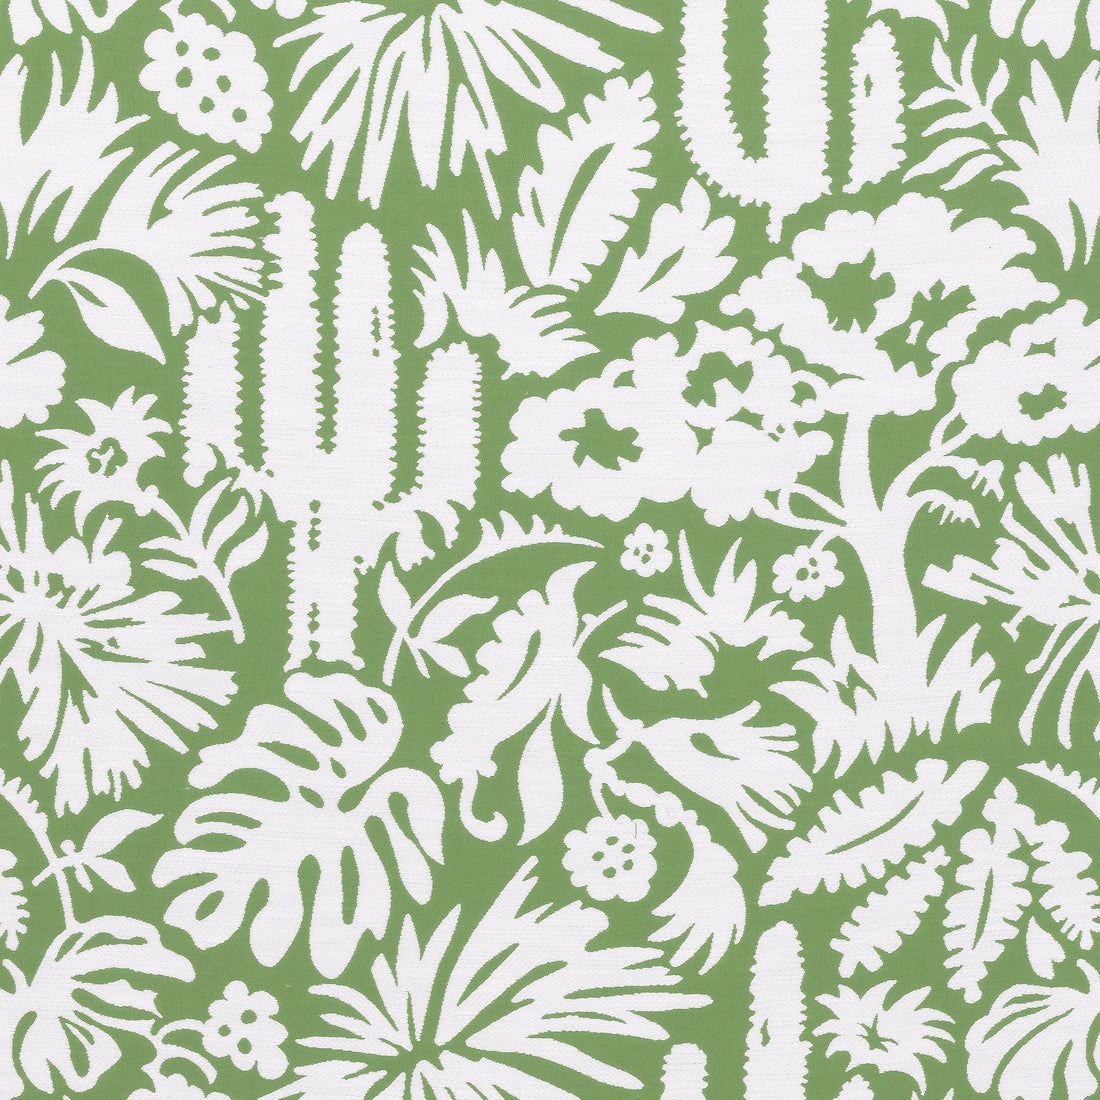 Botanica fabric in kelly green color - pattern number W74620 - by Thibaut in the Festival collection